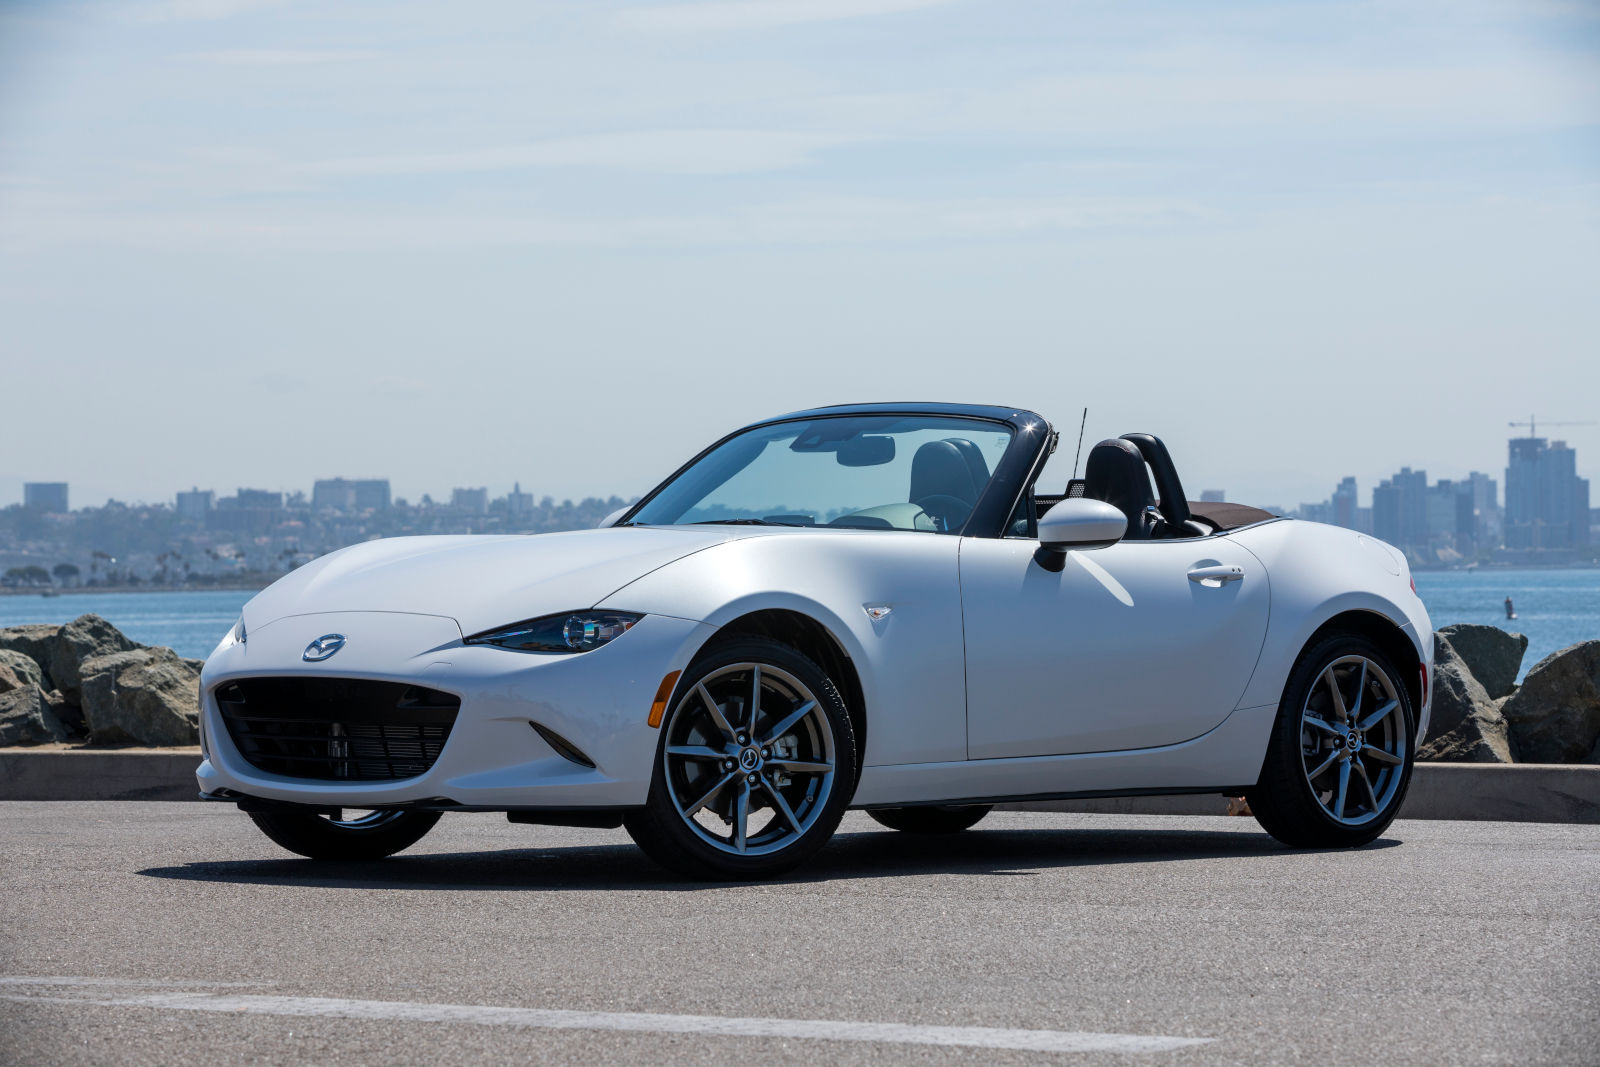 Pre-Owned Mazda MX-5: Your Fun, Reliable Summer Buy